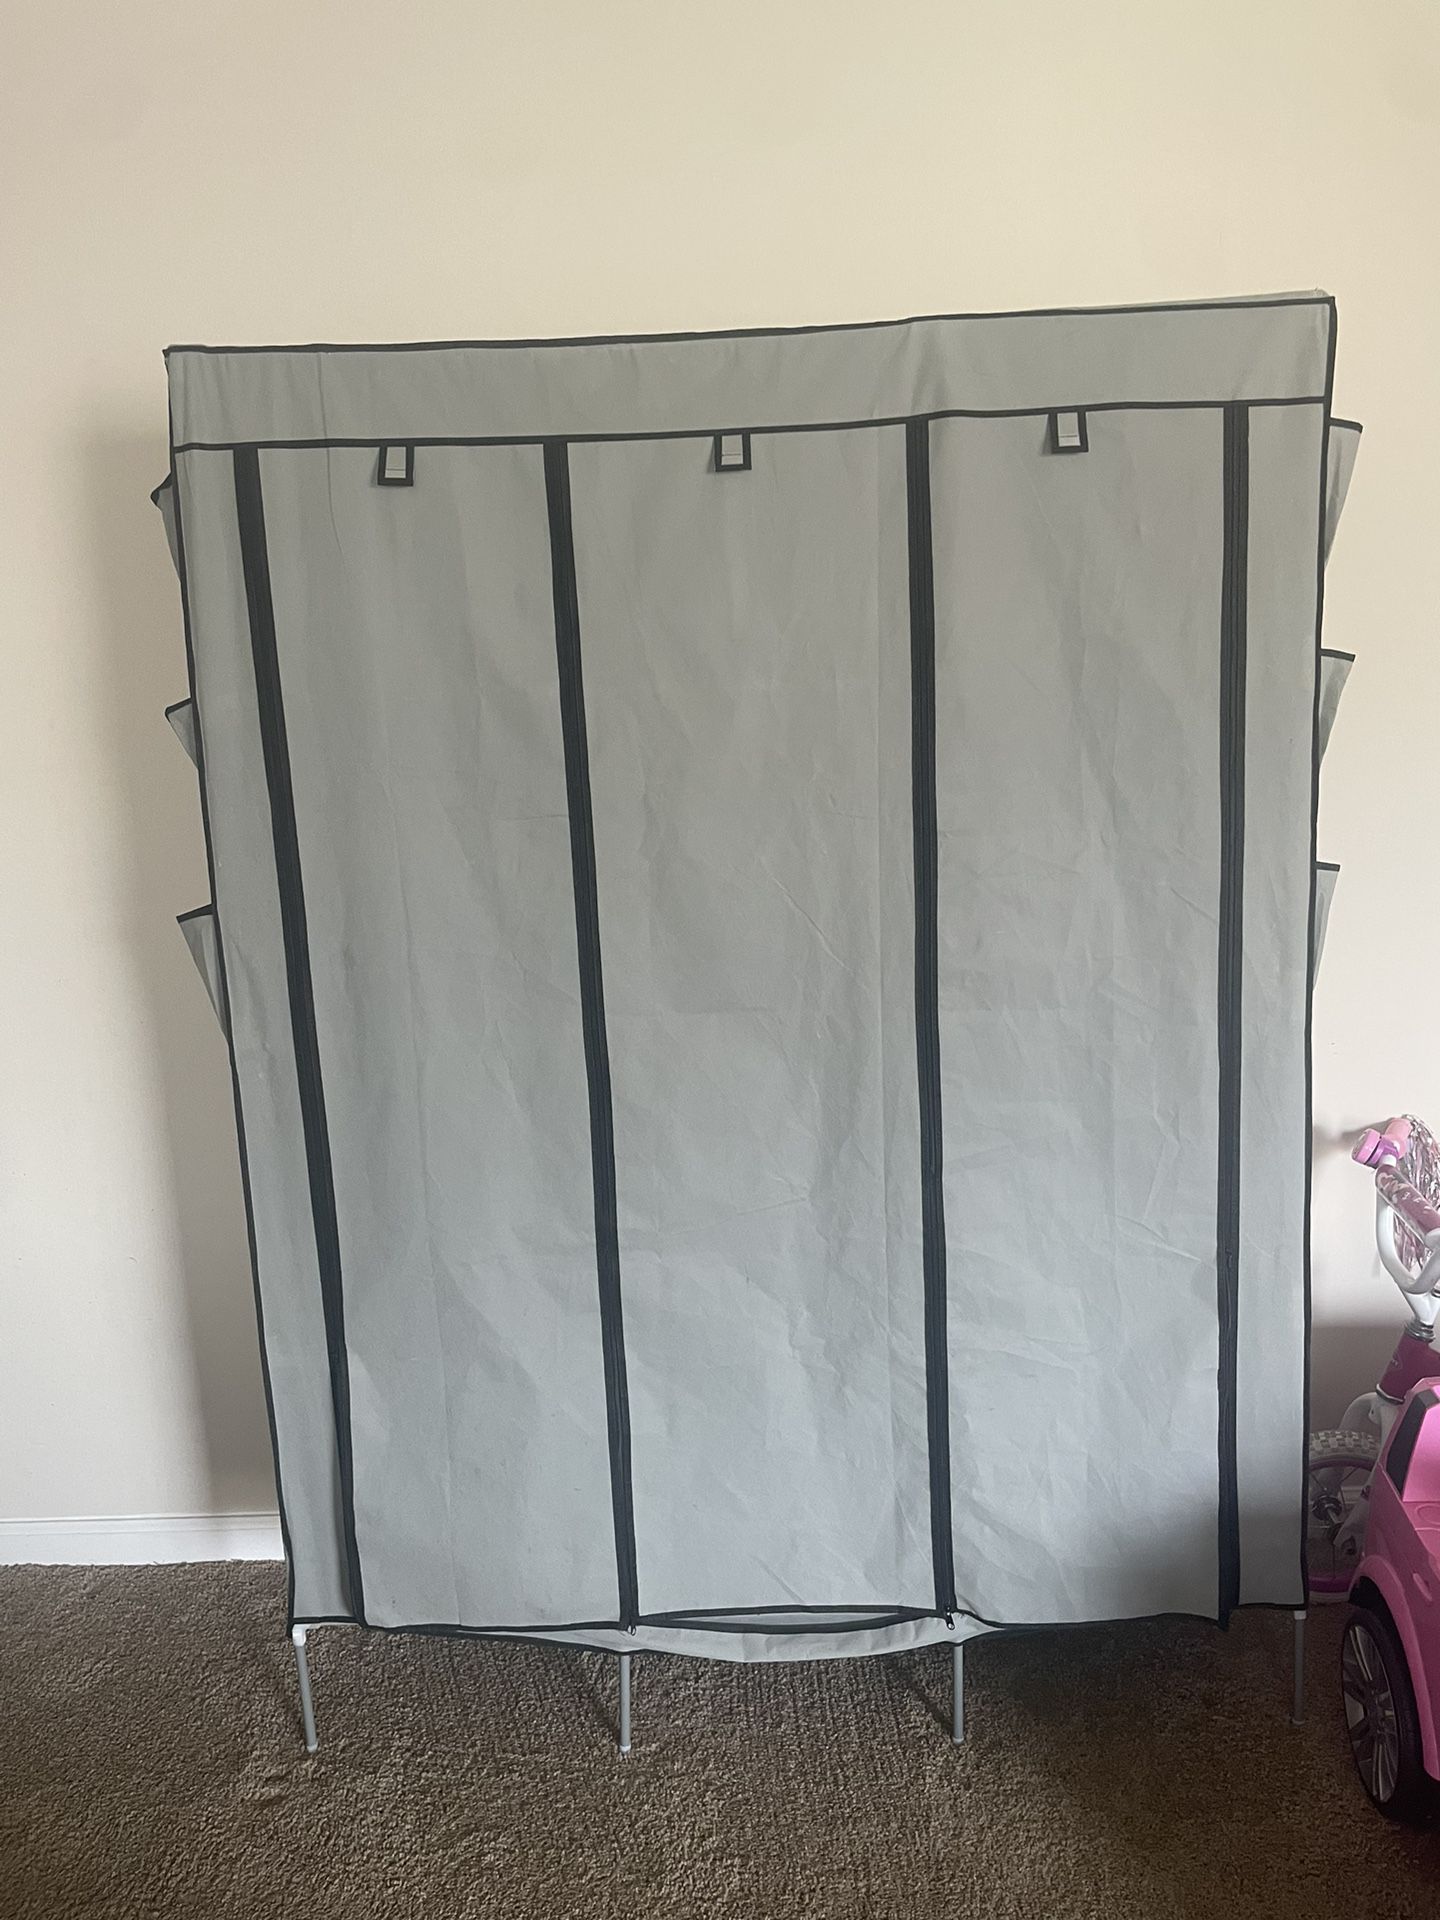 Wardrobe And Dresser For Sale